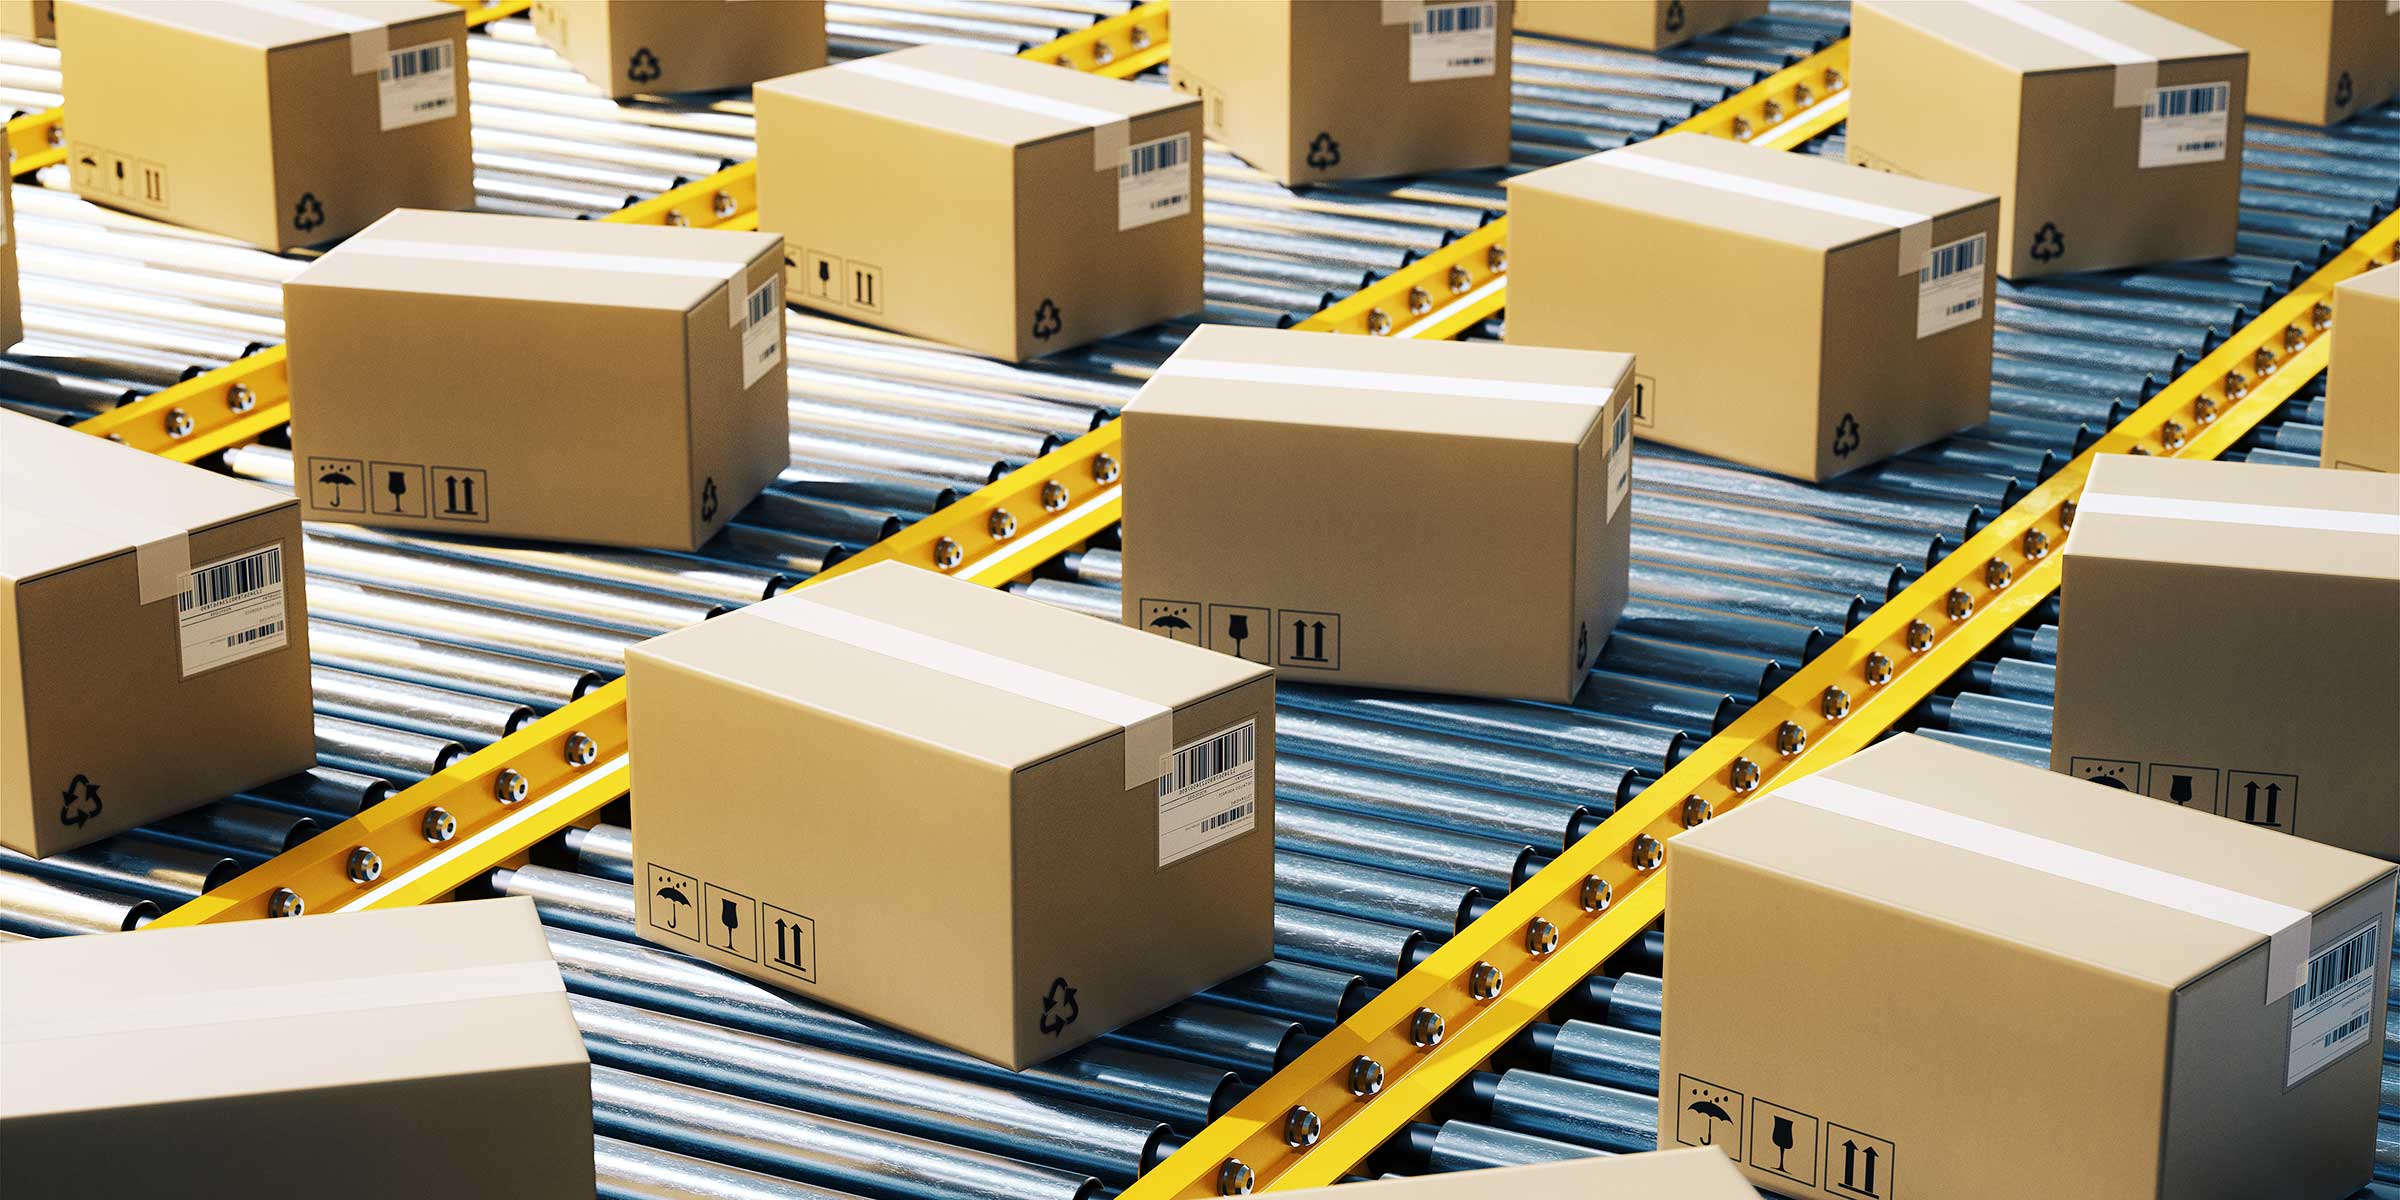 8 things to remember when outsourcing e-commerce logistics to a 3PL